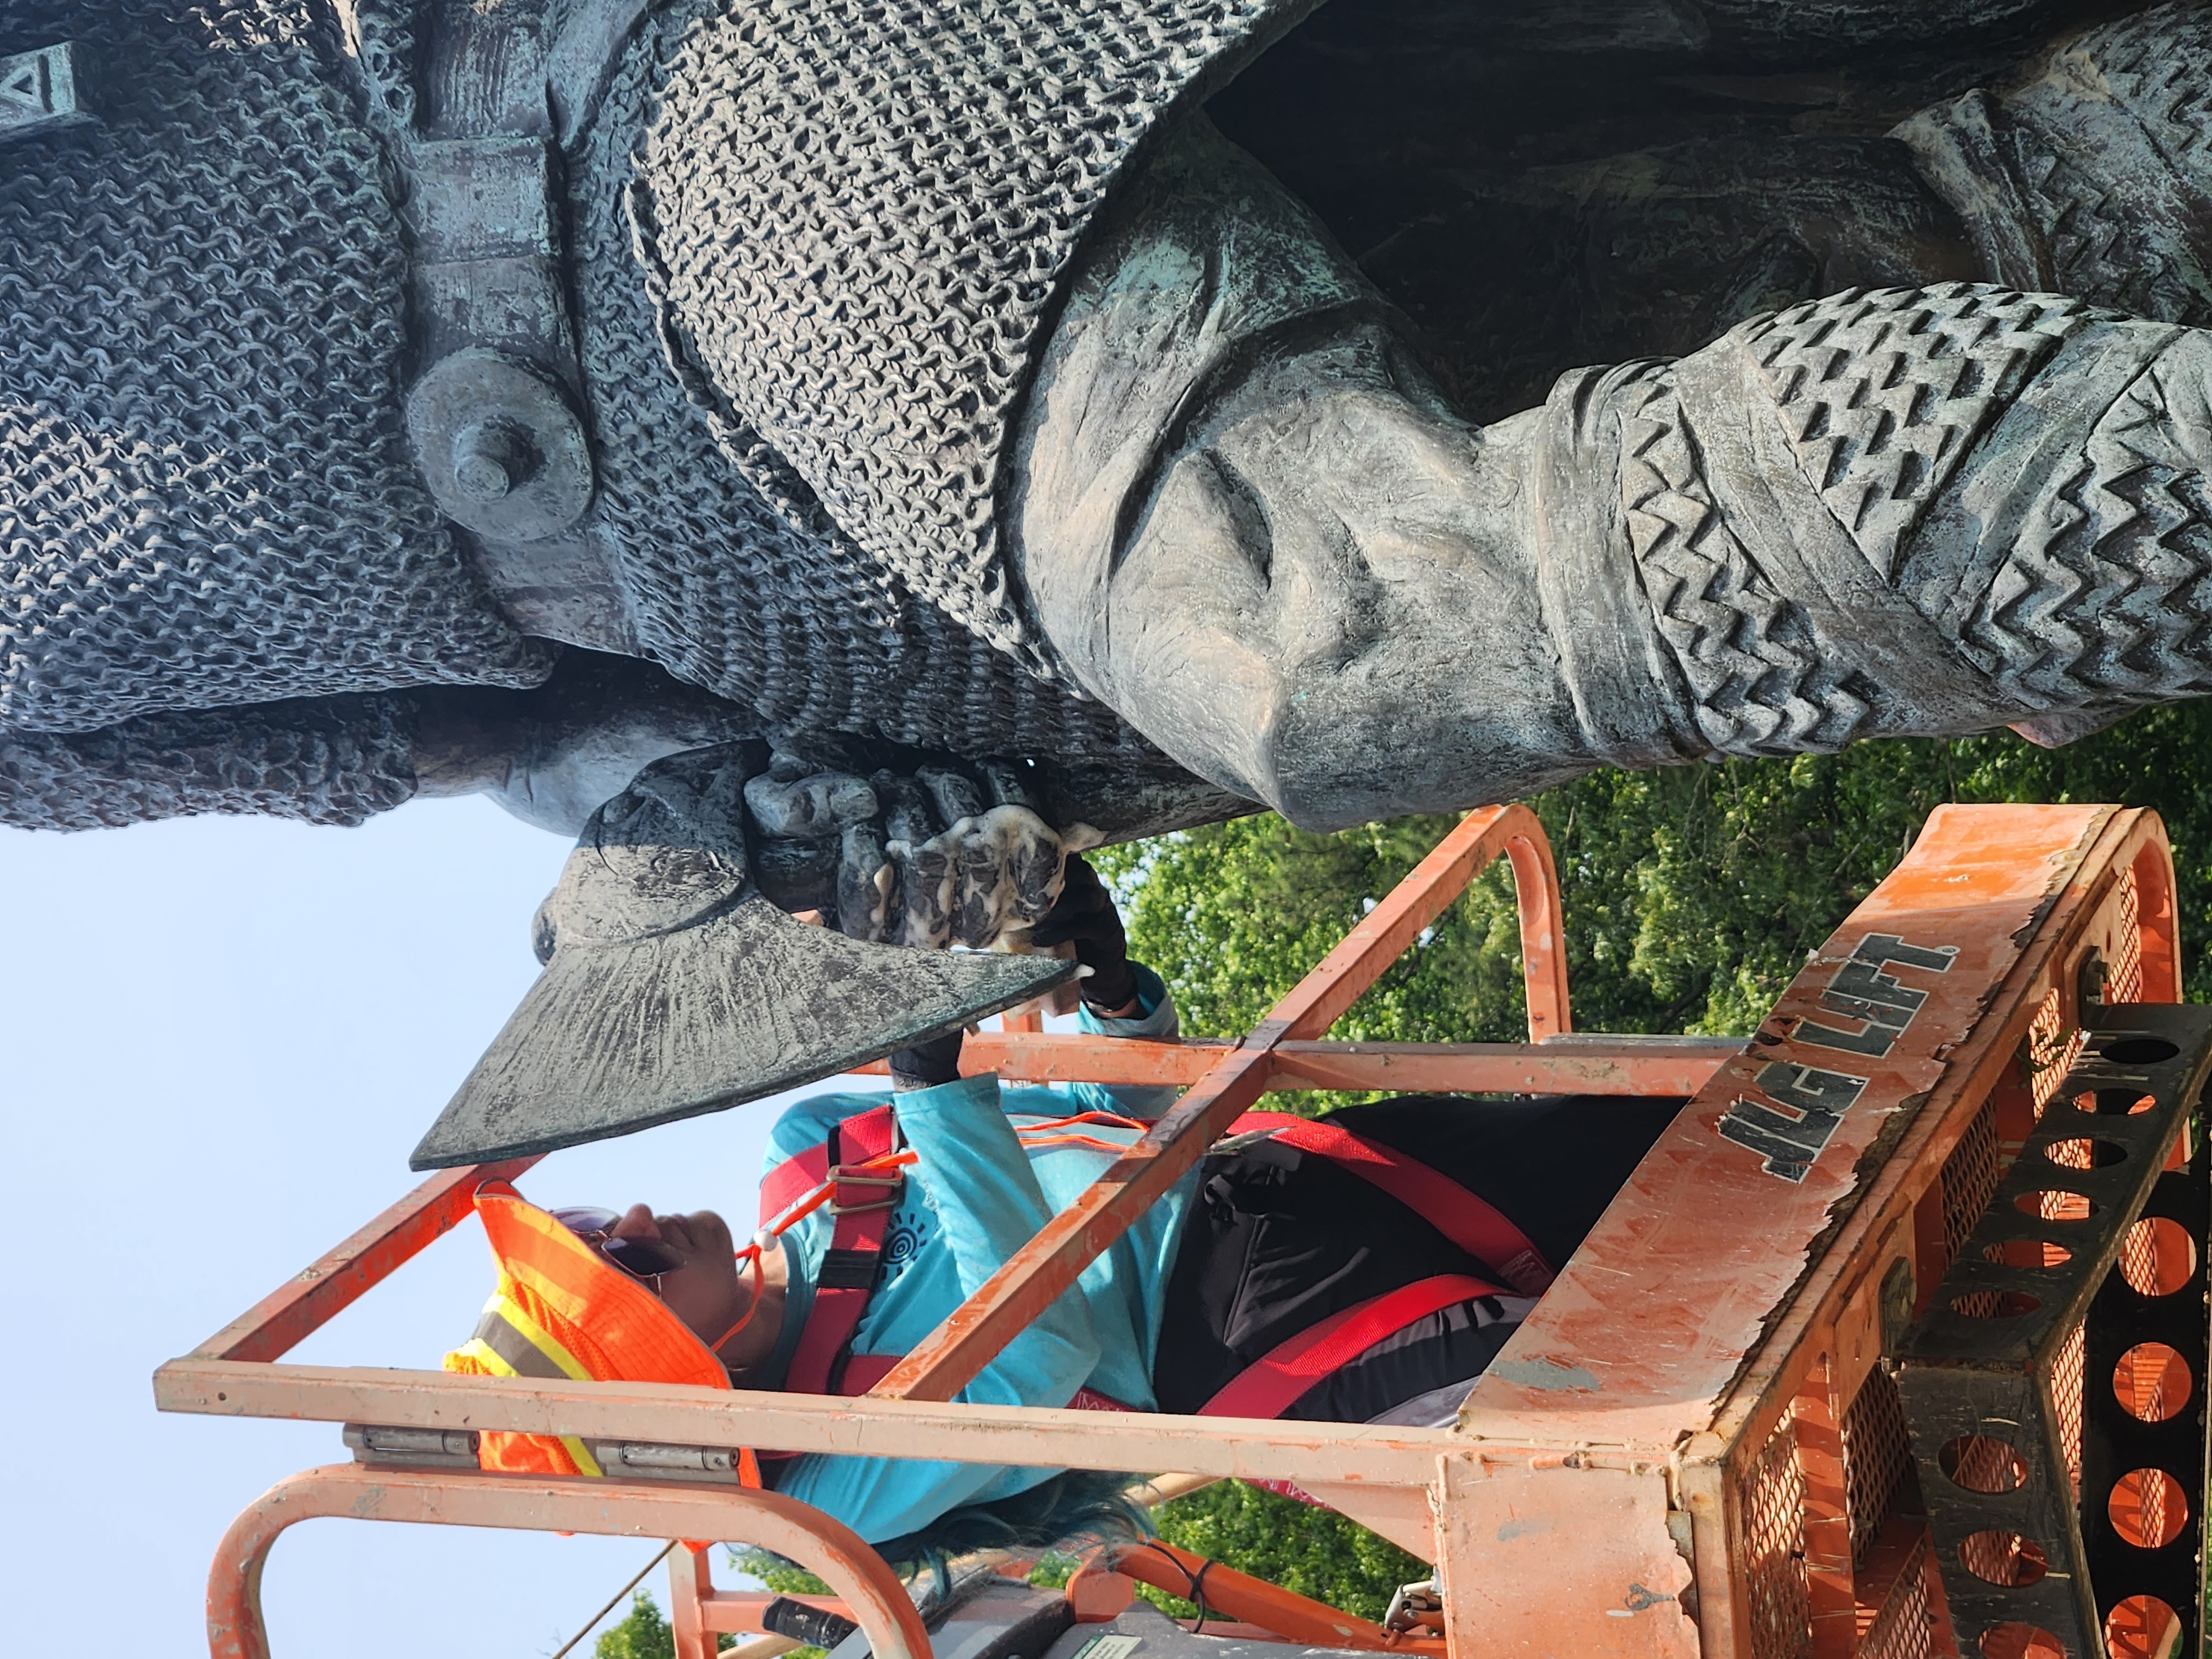 Image of Conservation intern Marimar Bracero Rodríguez on an orange lift cleaning the hand and axe of the statue of Leifr Eiriksson.